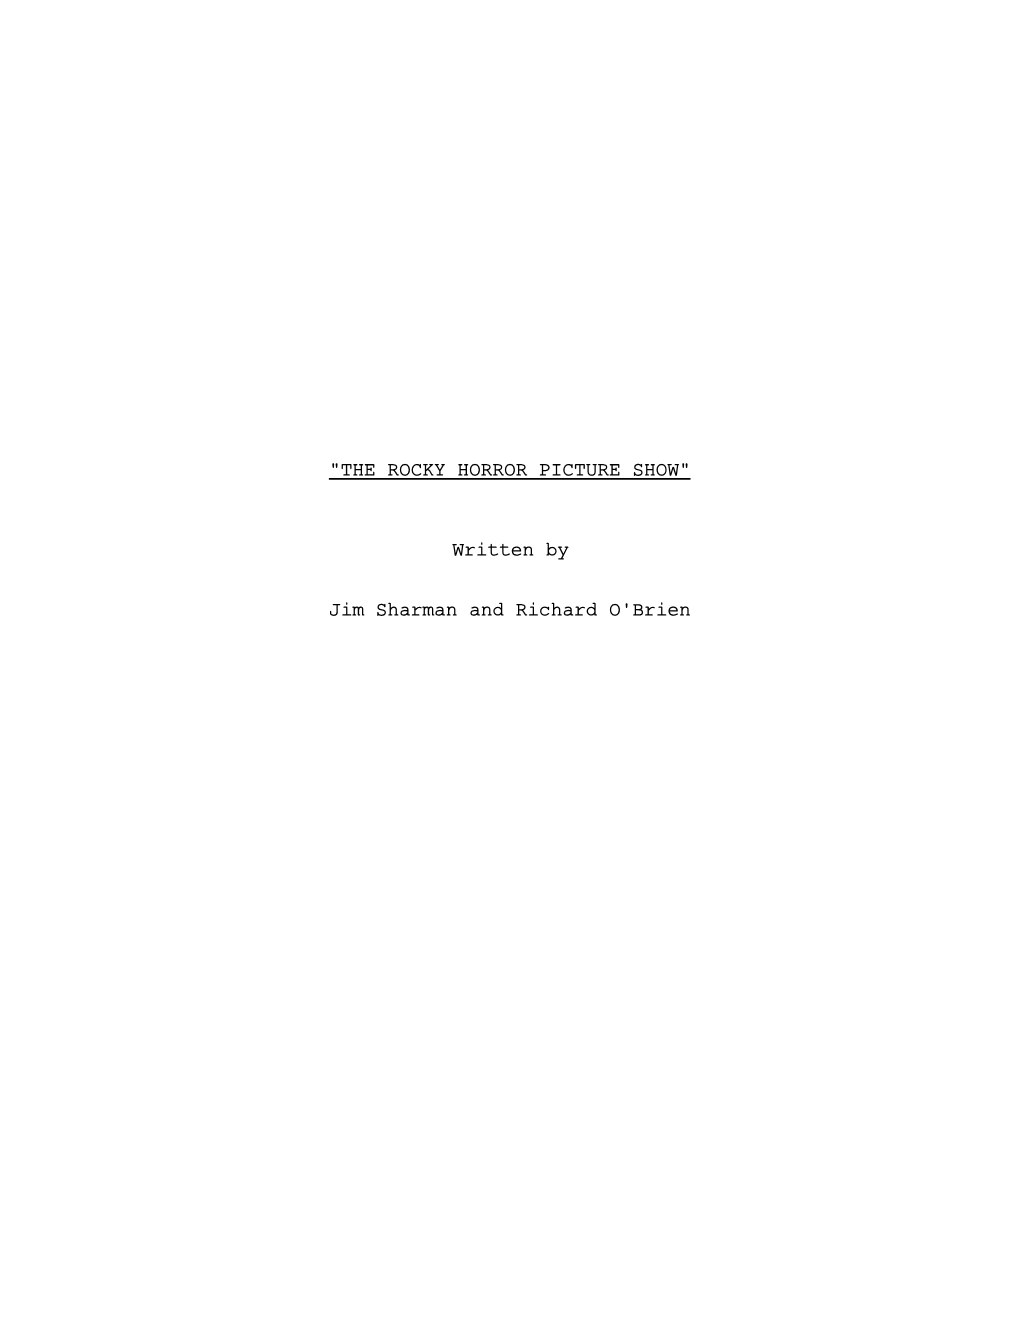 "THE ROCKY HORROR PICTURE SHOW" Written by Jim Sharman